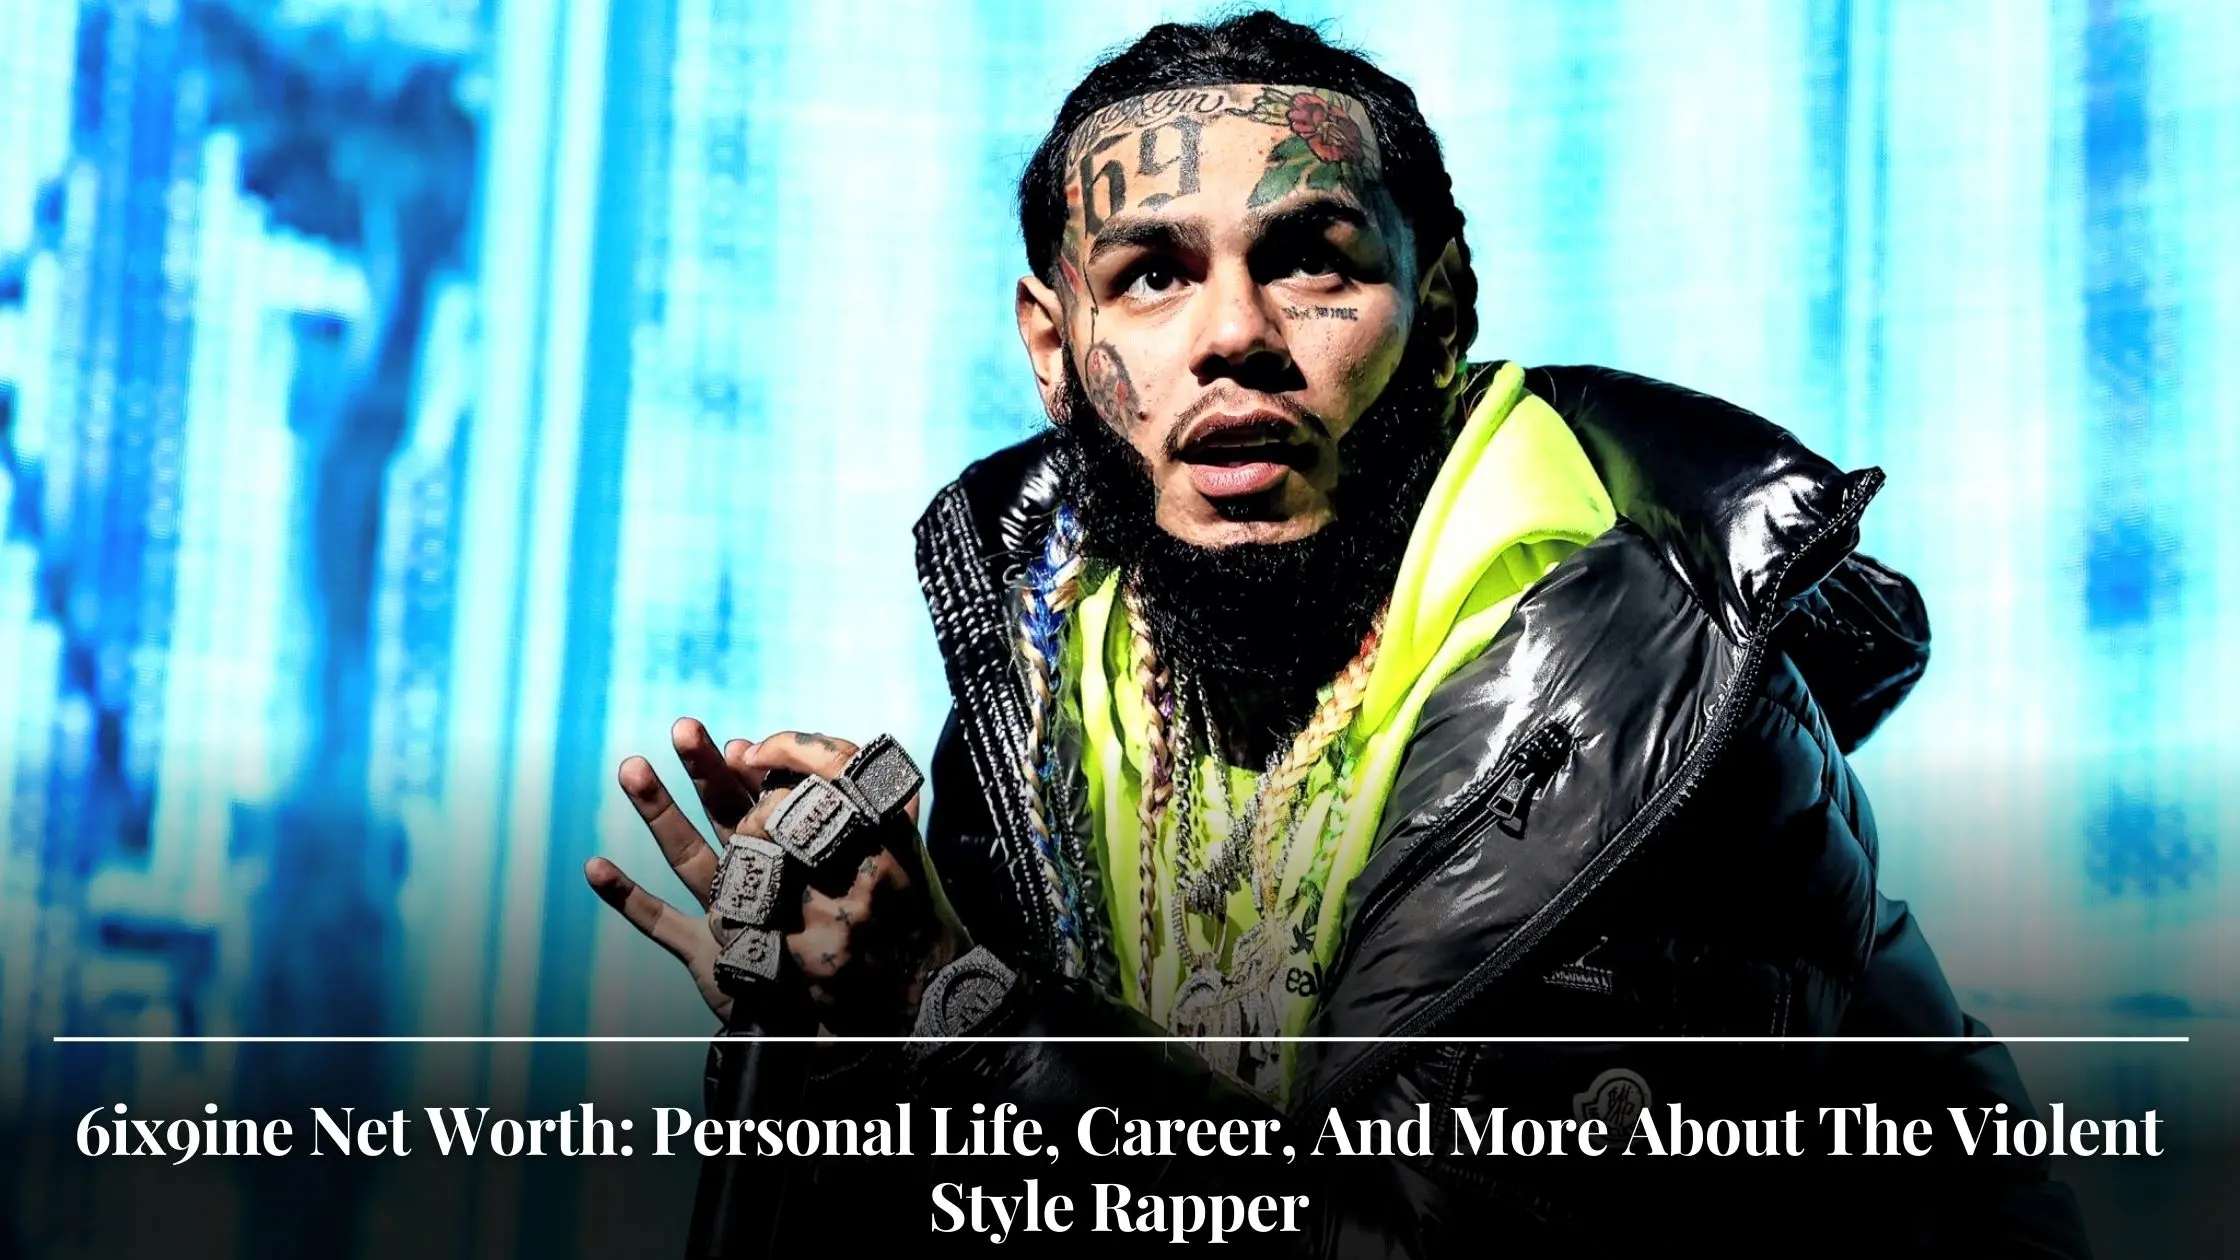 6ix9ine Net Worth Personal Life, Career, And More About The Violent Style Rapper